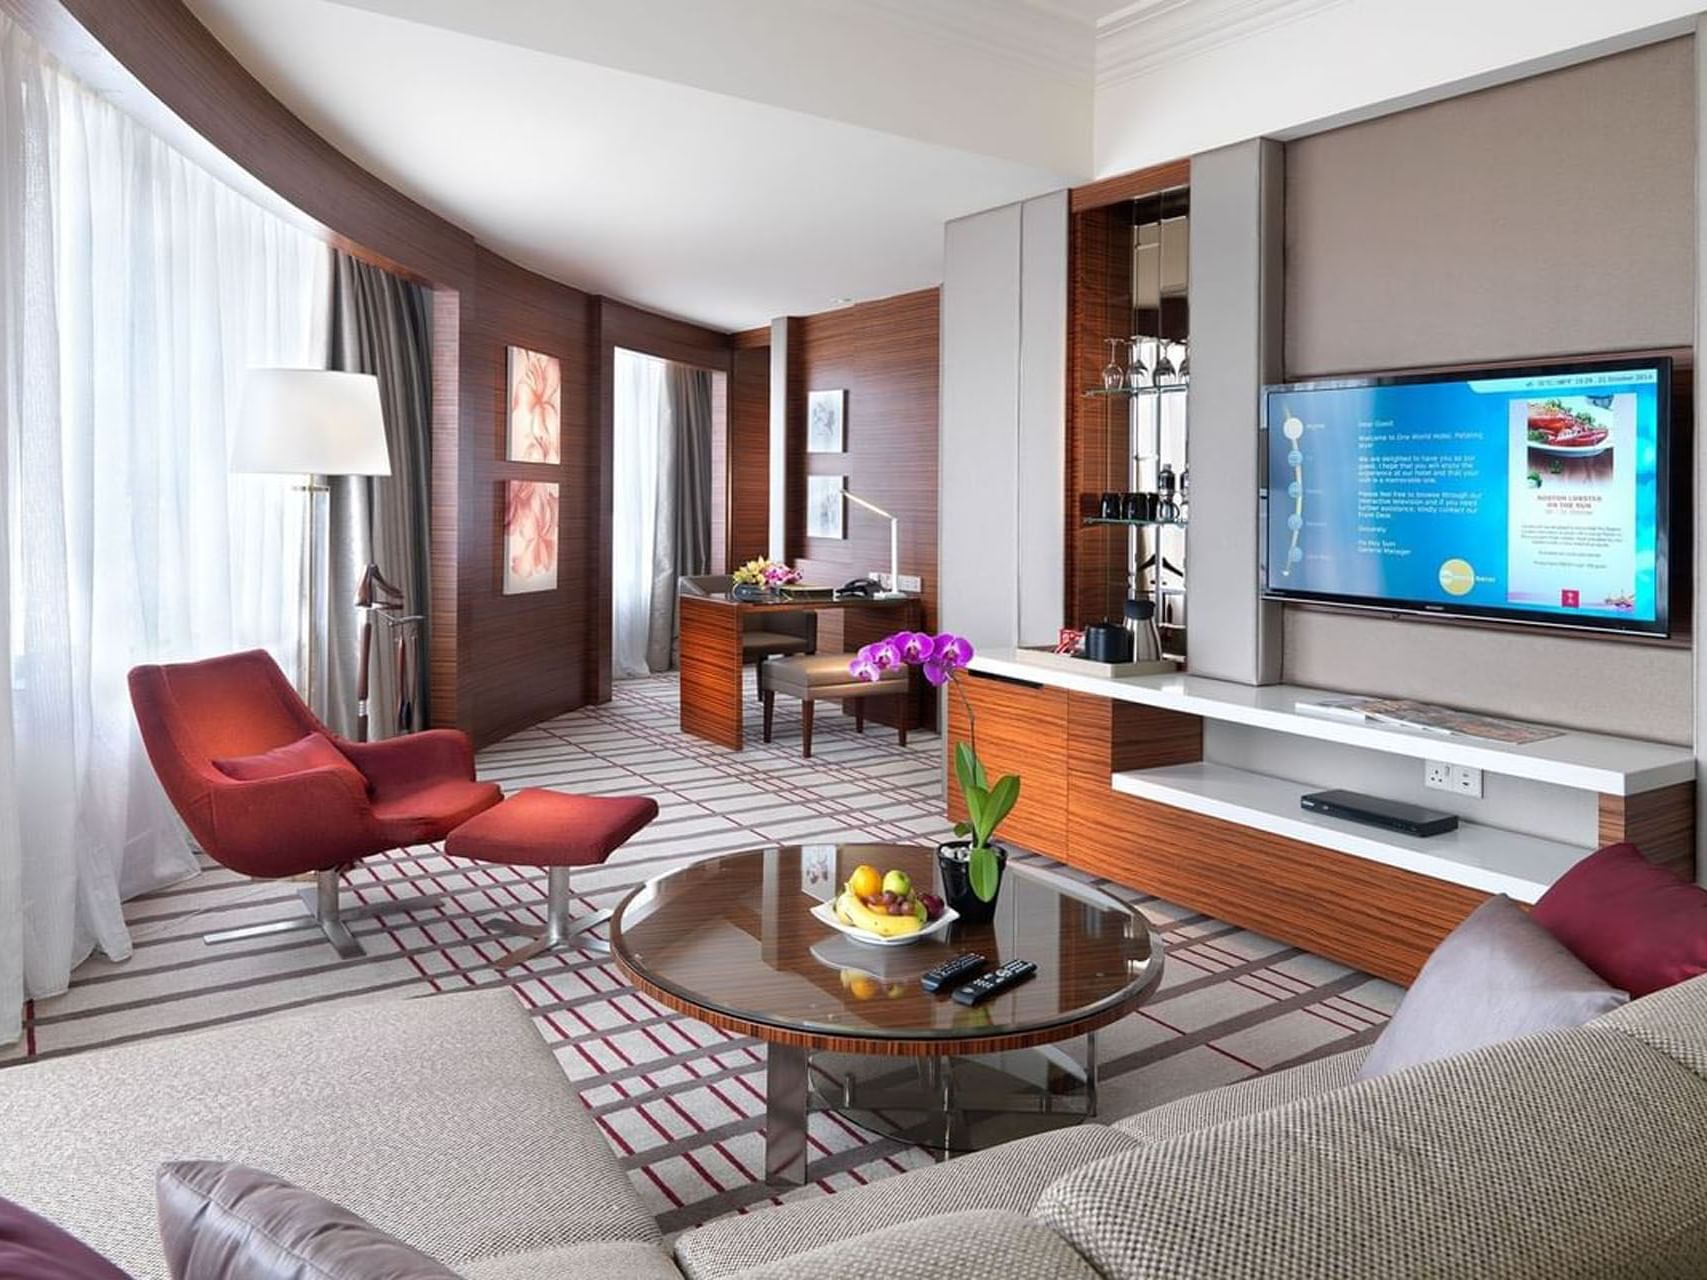 Modern living room with lavish interior & decor in Junior Suit with carpeted floors, A One World Hotel room